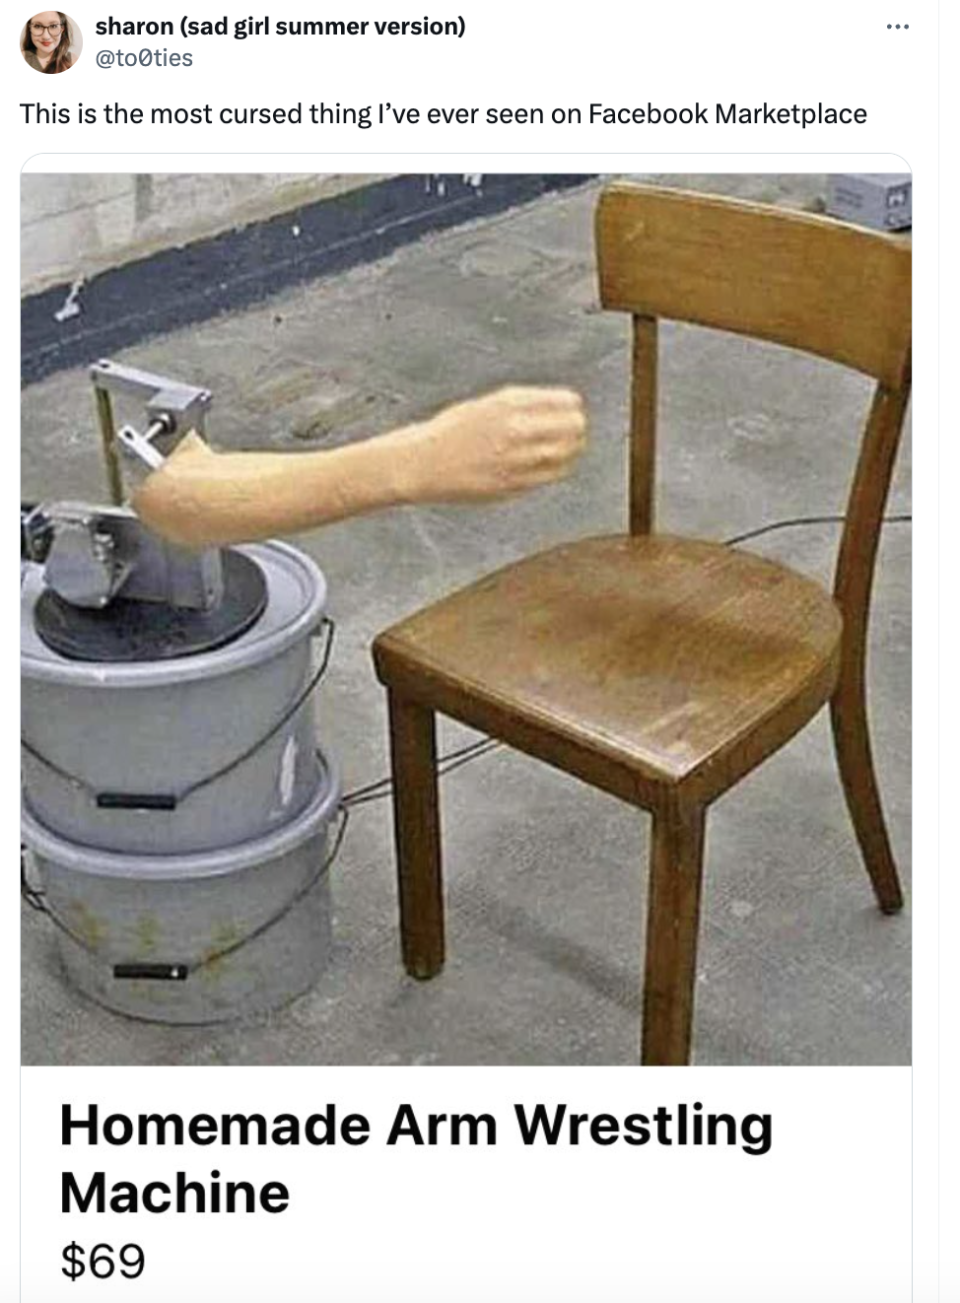 Wooden chair modified with fake human arm for arm wrestling, labeled "Homemade Arm Wrestling Machine, $69"